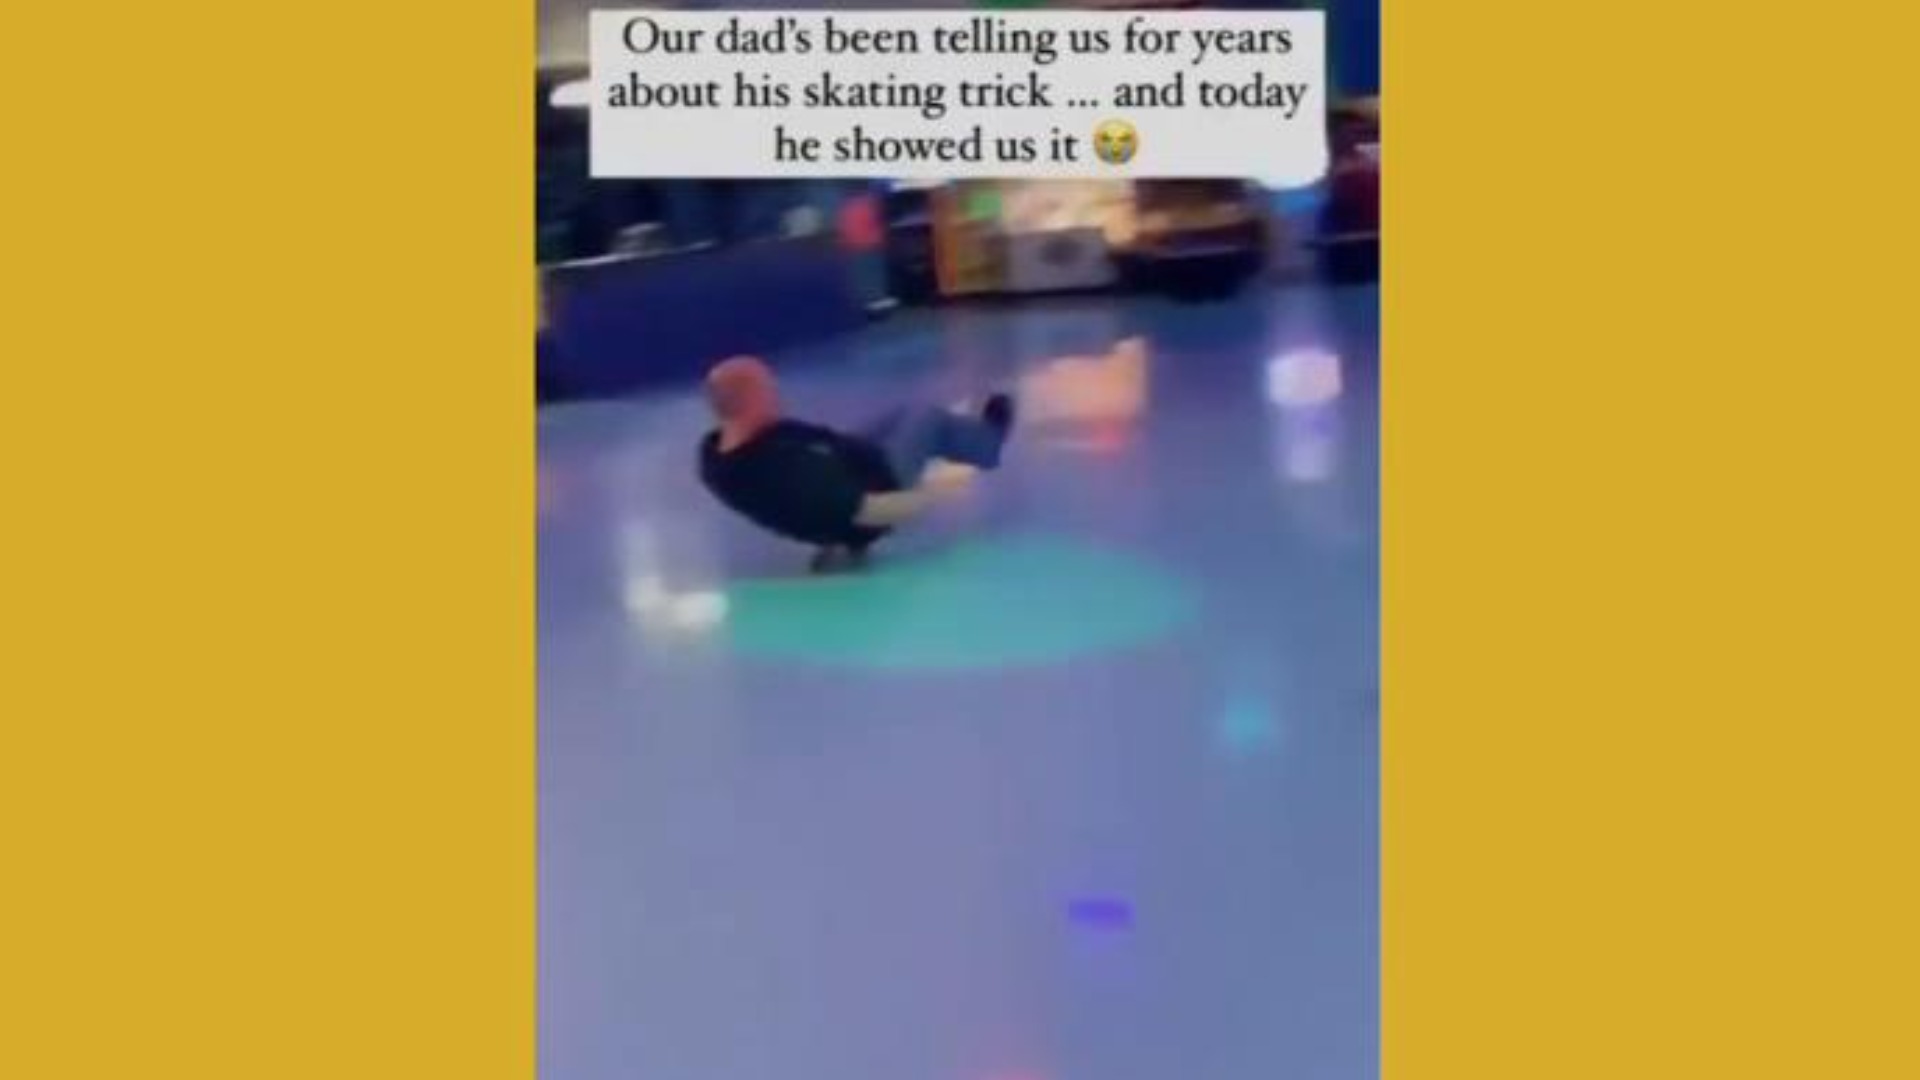 You have to see this dad's viral skating trick